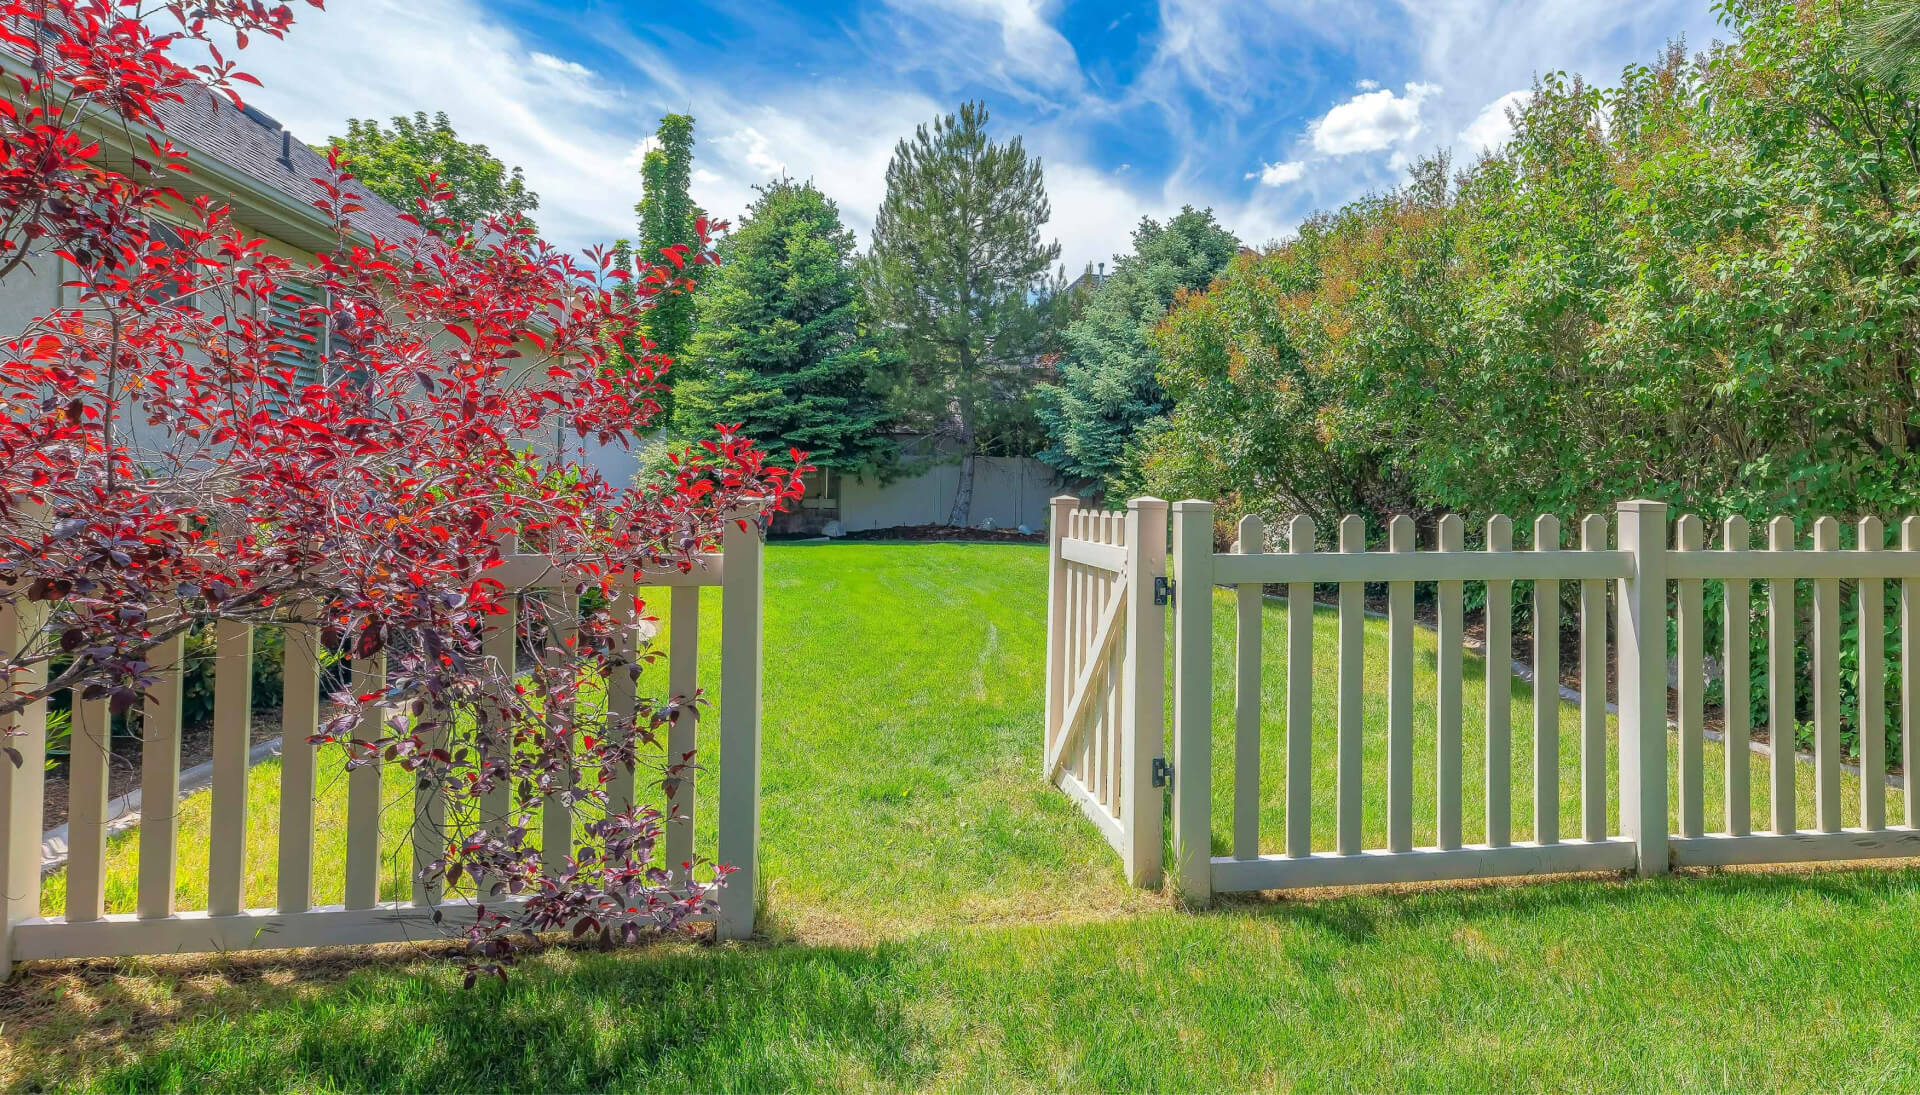 A functional fence gate providing access to a well-maintained backyard, surrounded by a wooden fence in Staten Island